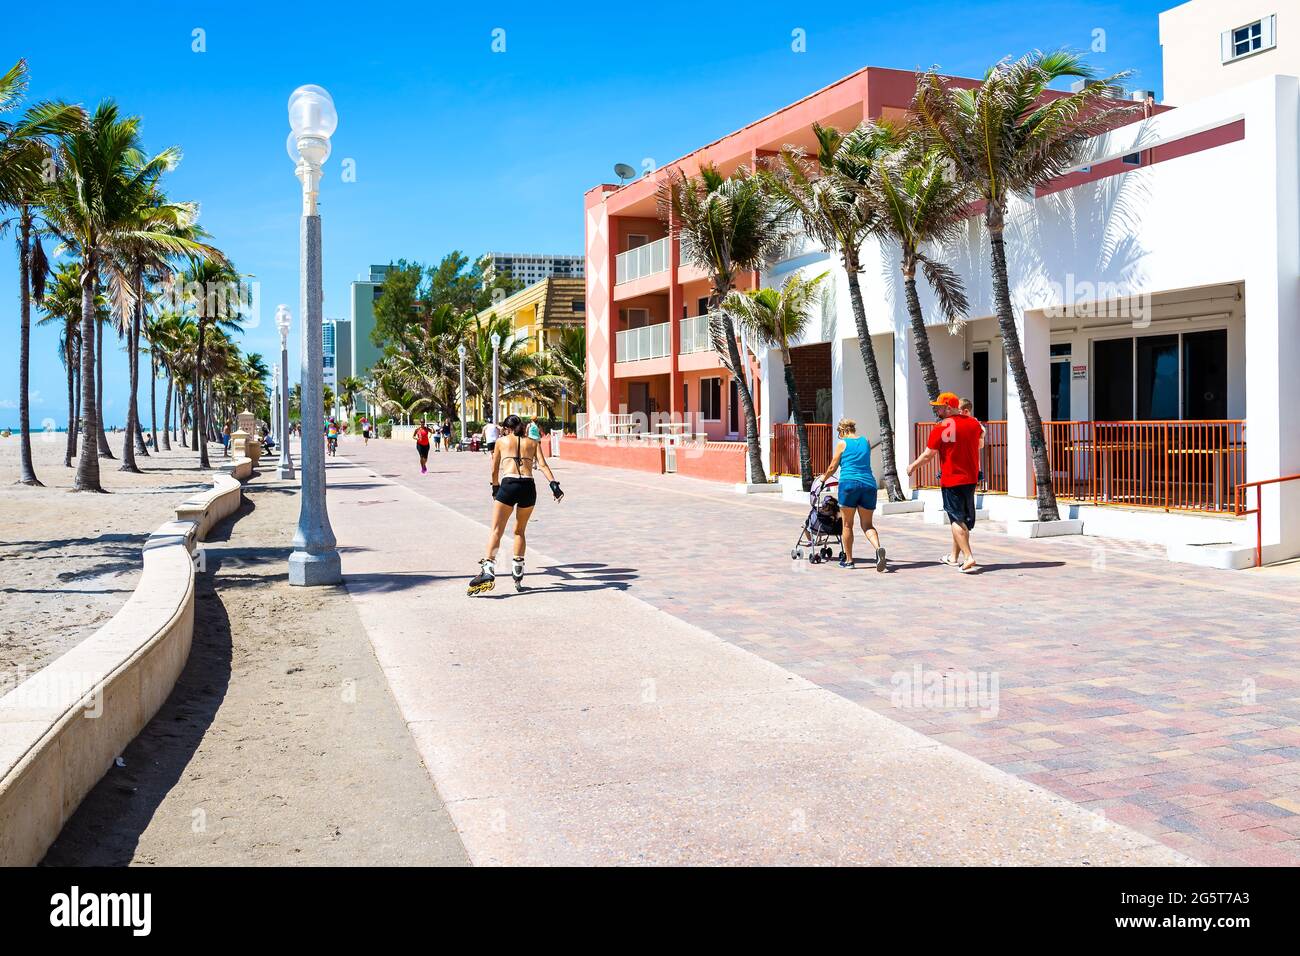 Hollywood, USA - May 6, 2018: Beach broadwalk in Florida with sunny day and people on promenade coast roller blading skating on bicycle lane Stock Photo